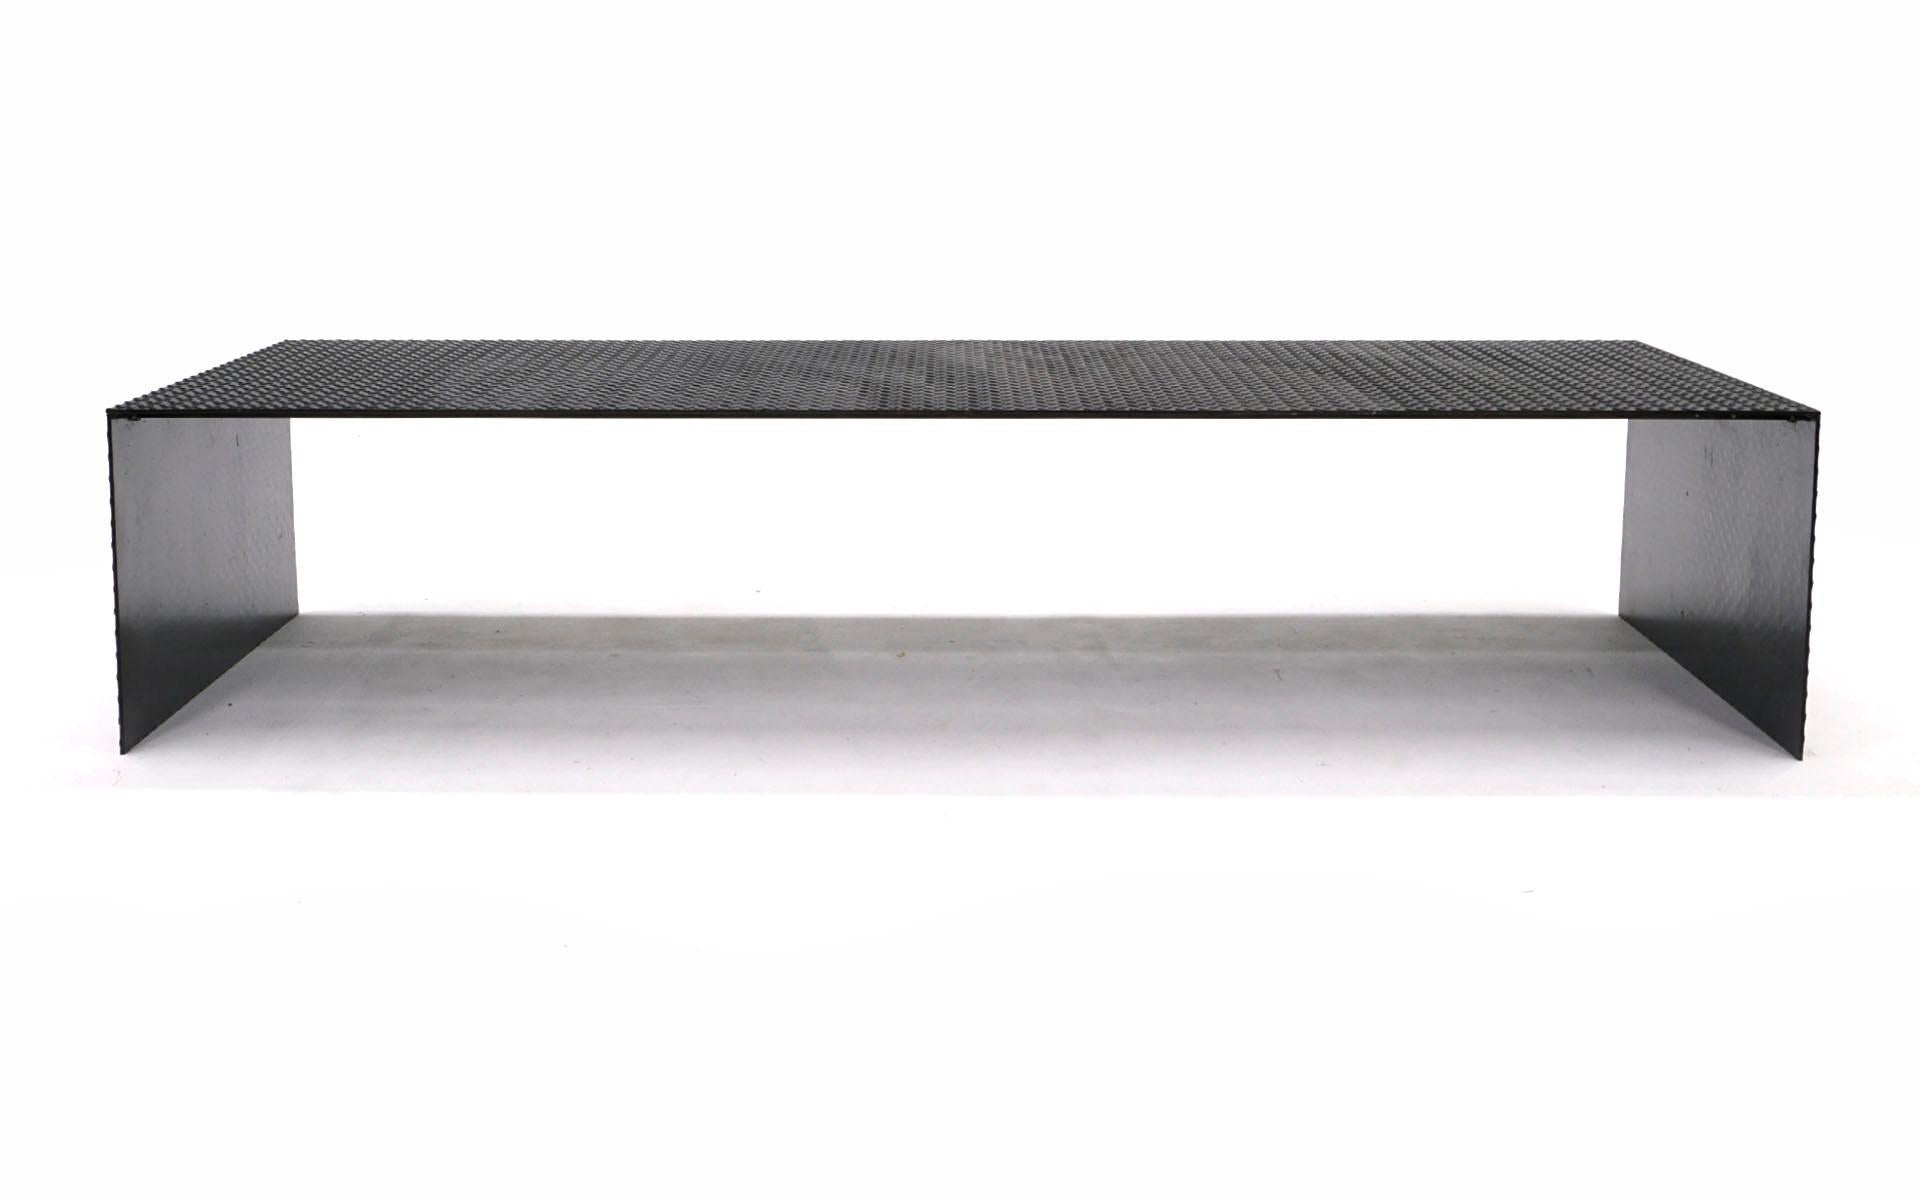 Eight feet long coffee table / bench custom made in diamond plate steel. Additional steel supports keep the piece structurally sound and flat. One of a kind and in very good to excellent condition. Measure: 8ft.